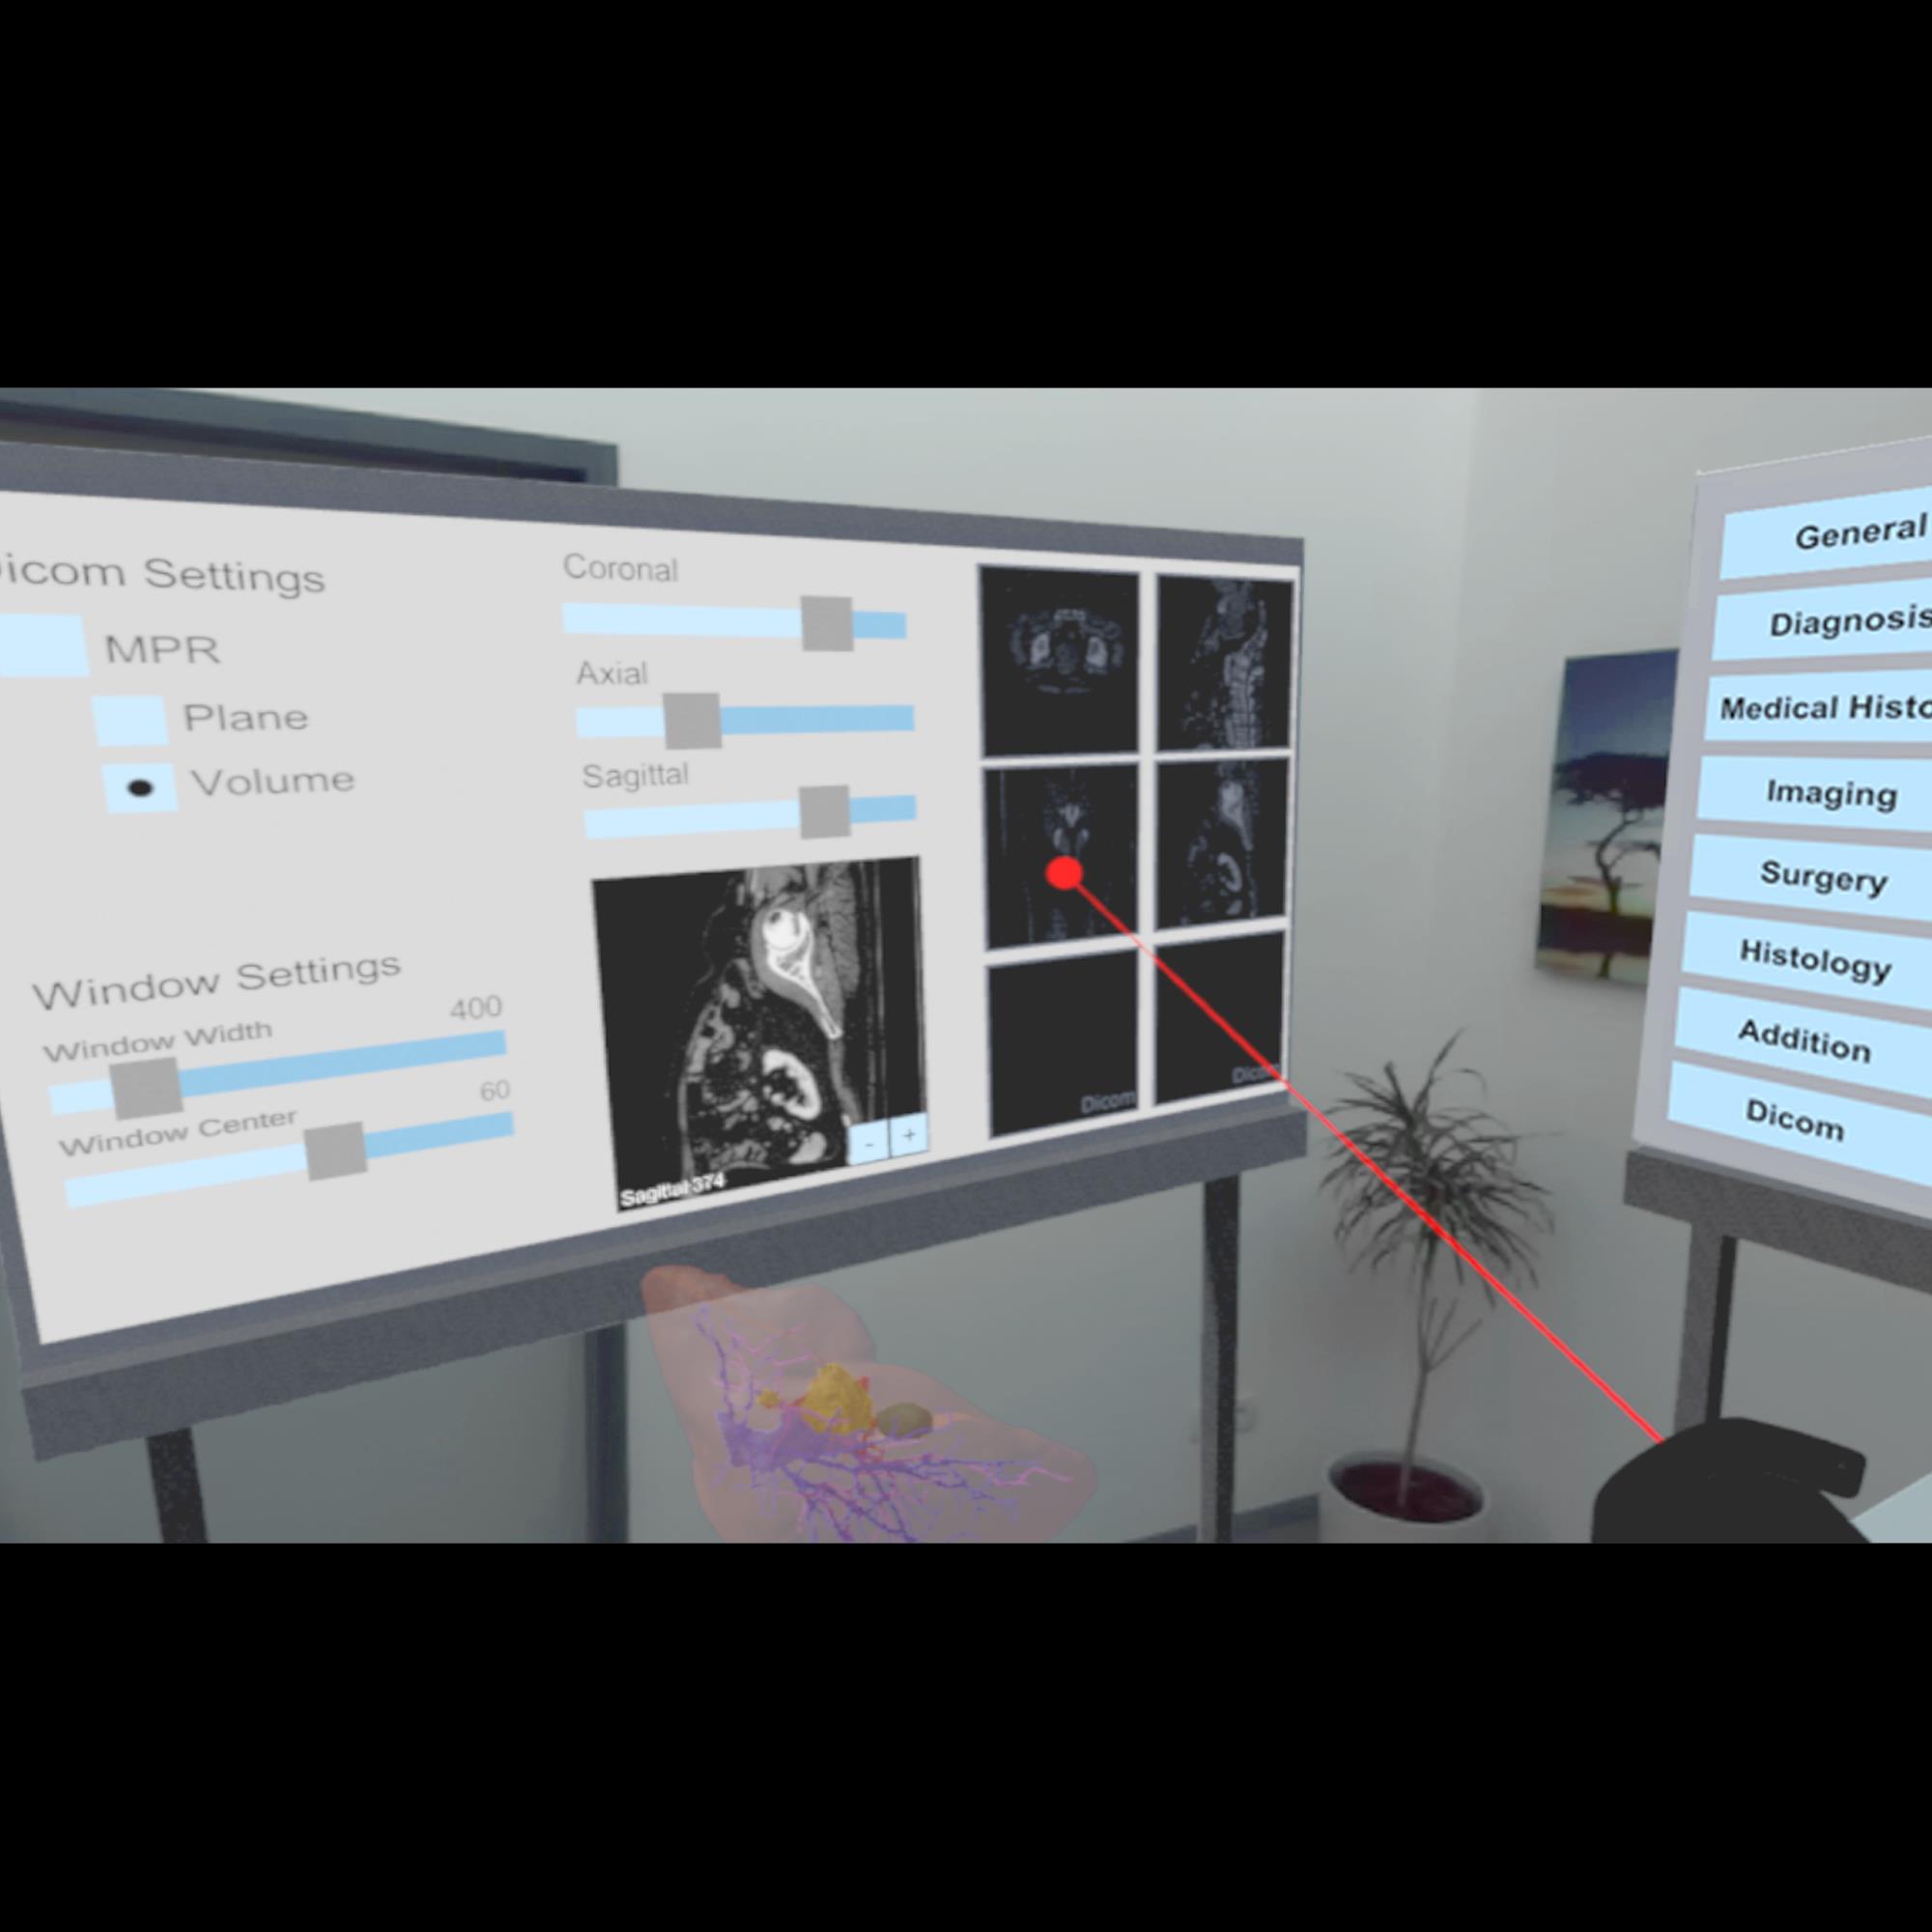 A VR/AR Environment for Multi-User Liver Anatomy Education